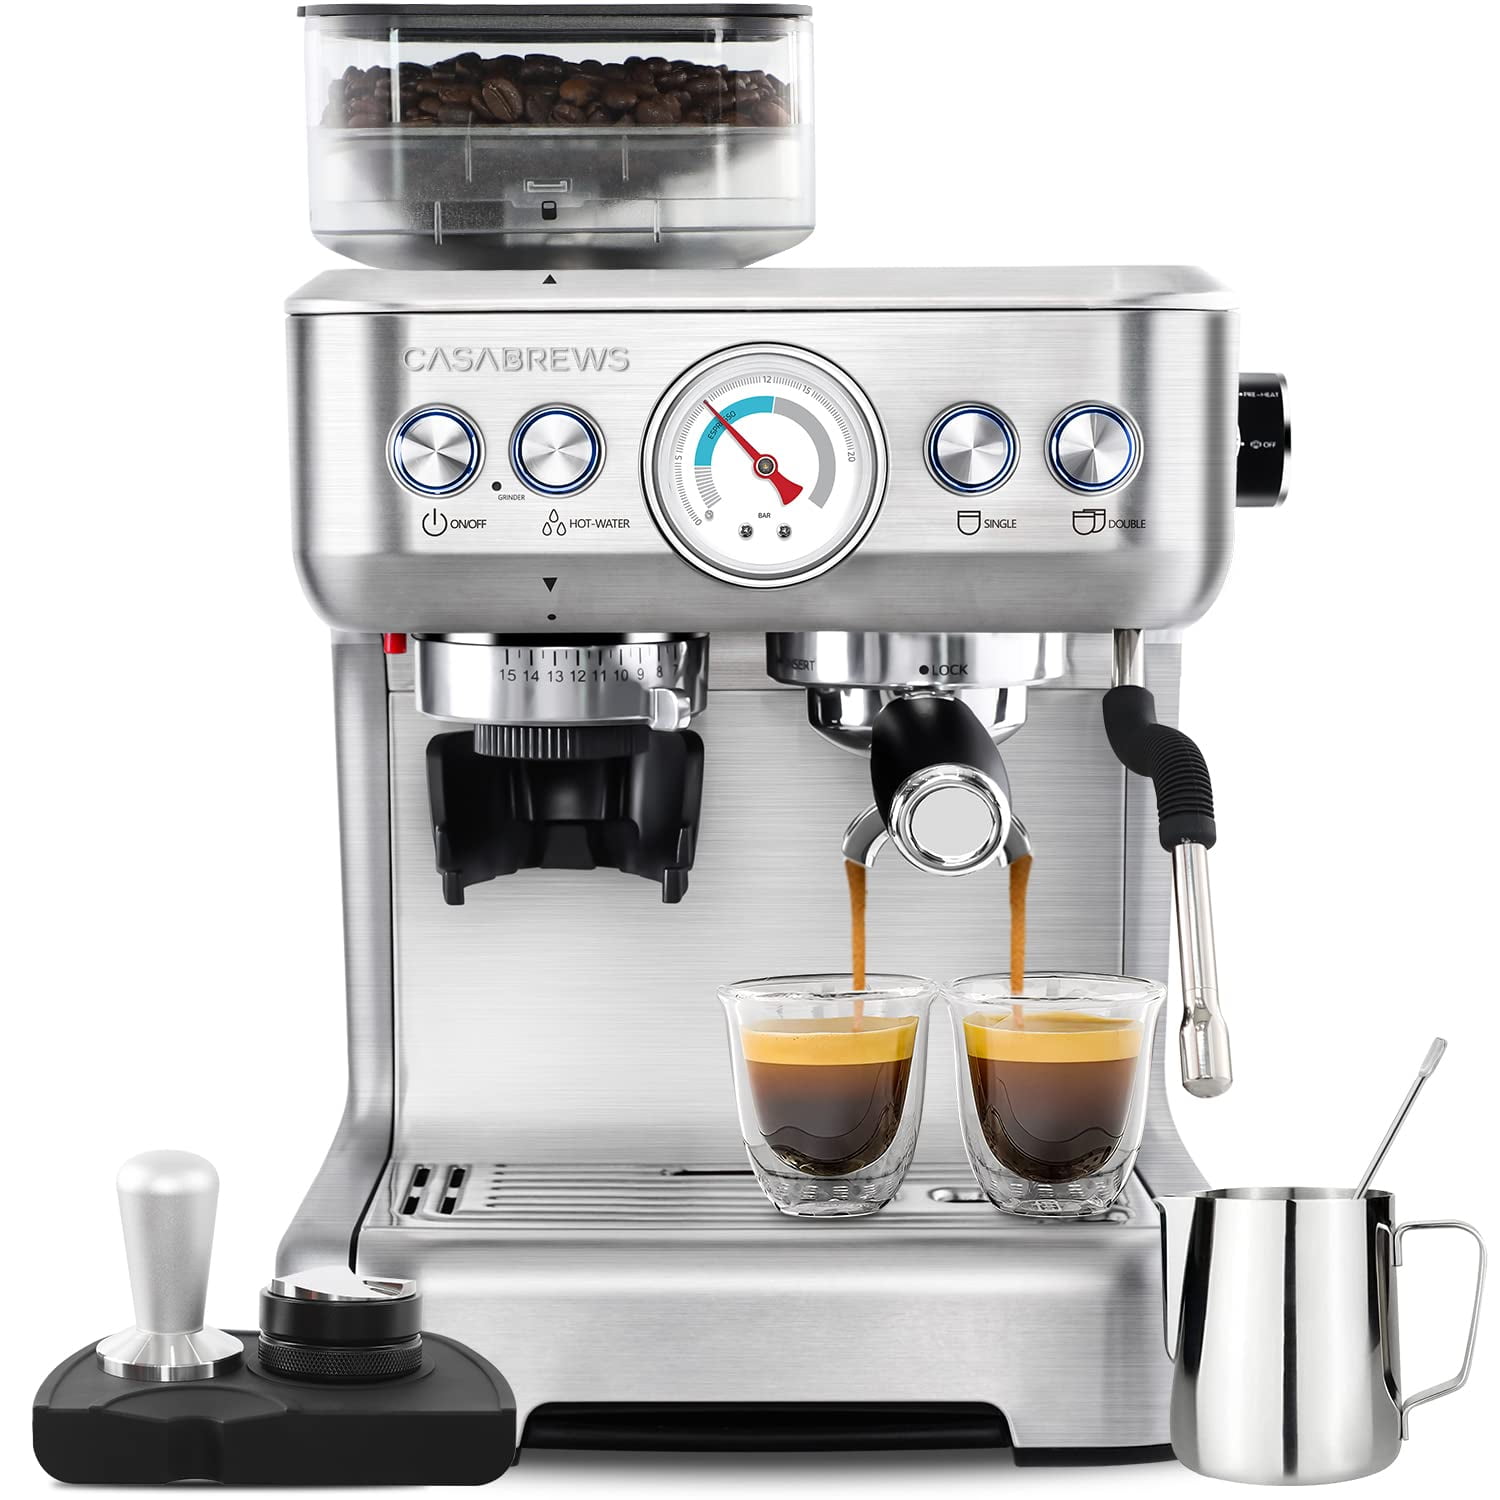 Dropship Espresso Machine, 15 Bar, Silver, Stainless Steel, Steam Wand to  Sell Online at a Lower Price